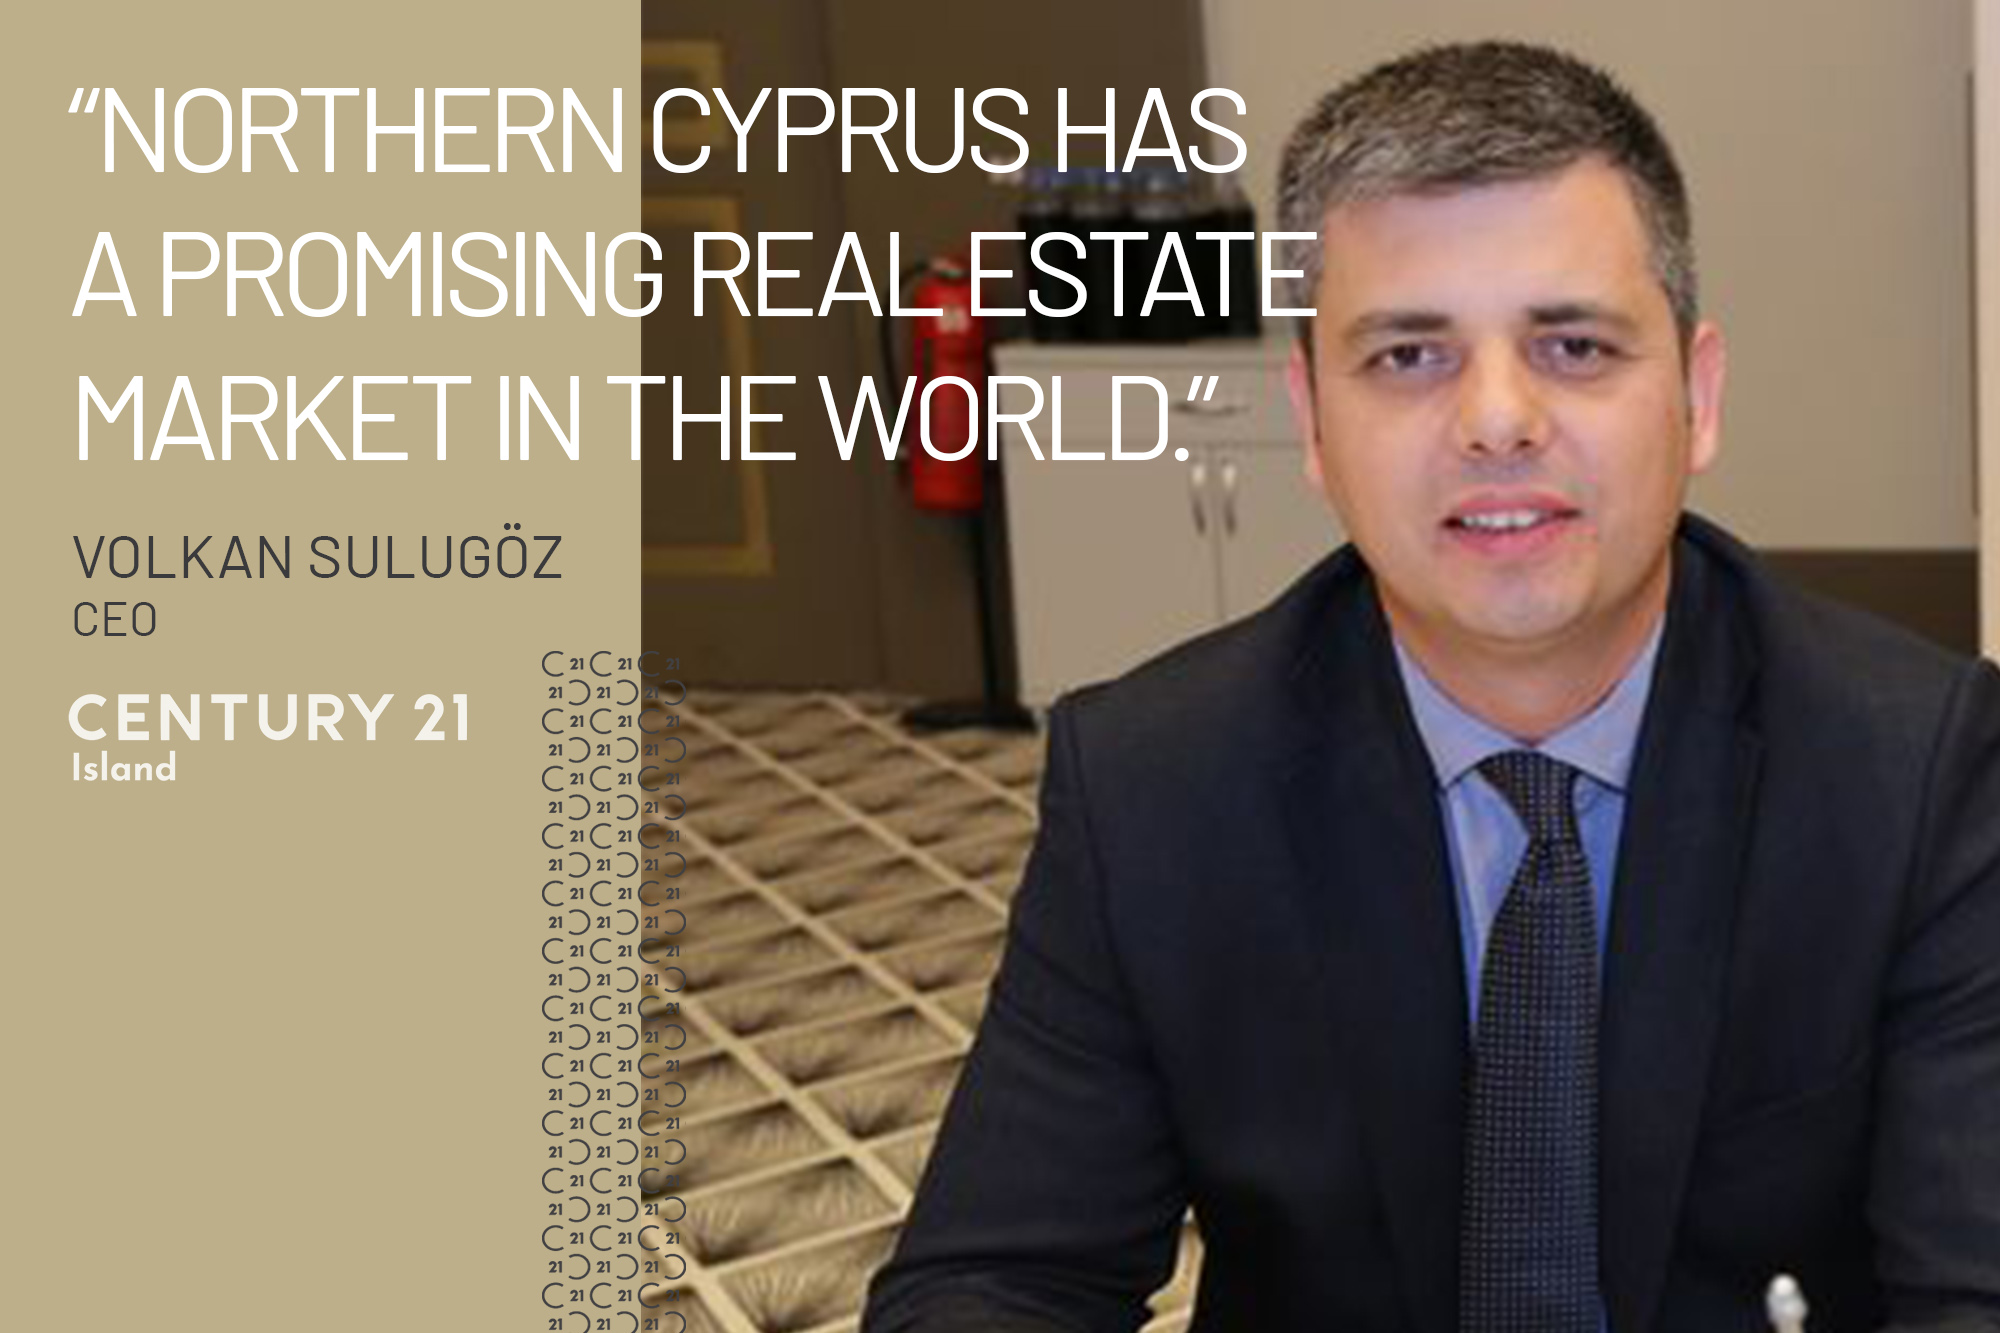 Interview About the Northern Cyprus Real Estate Sector